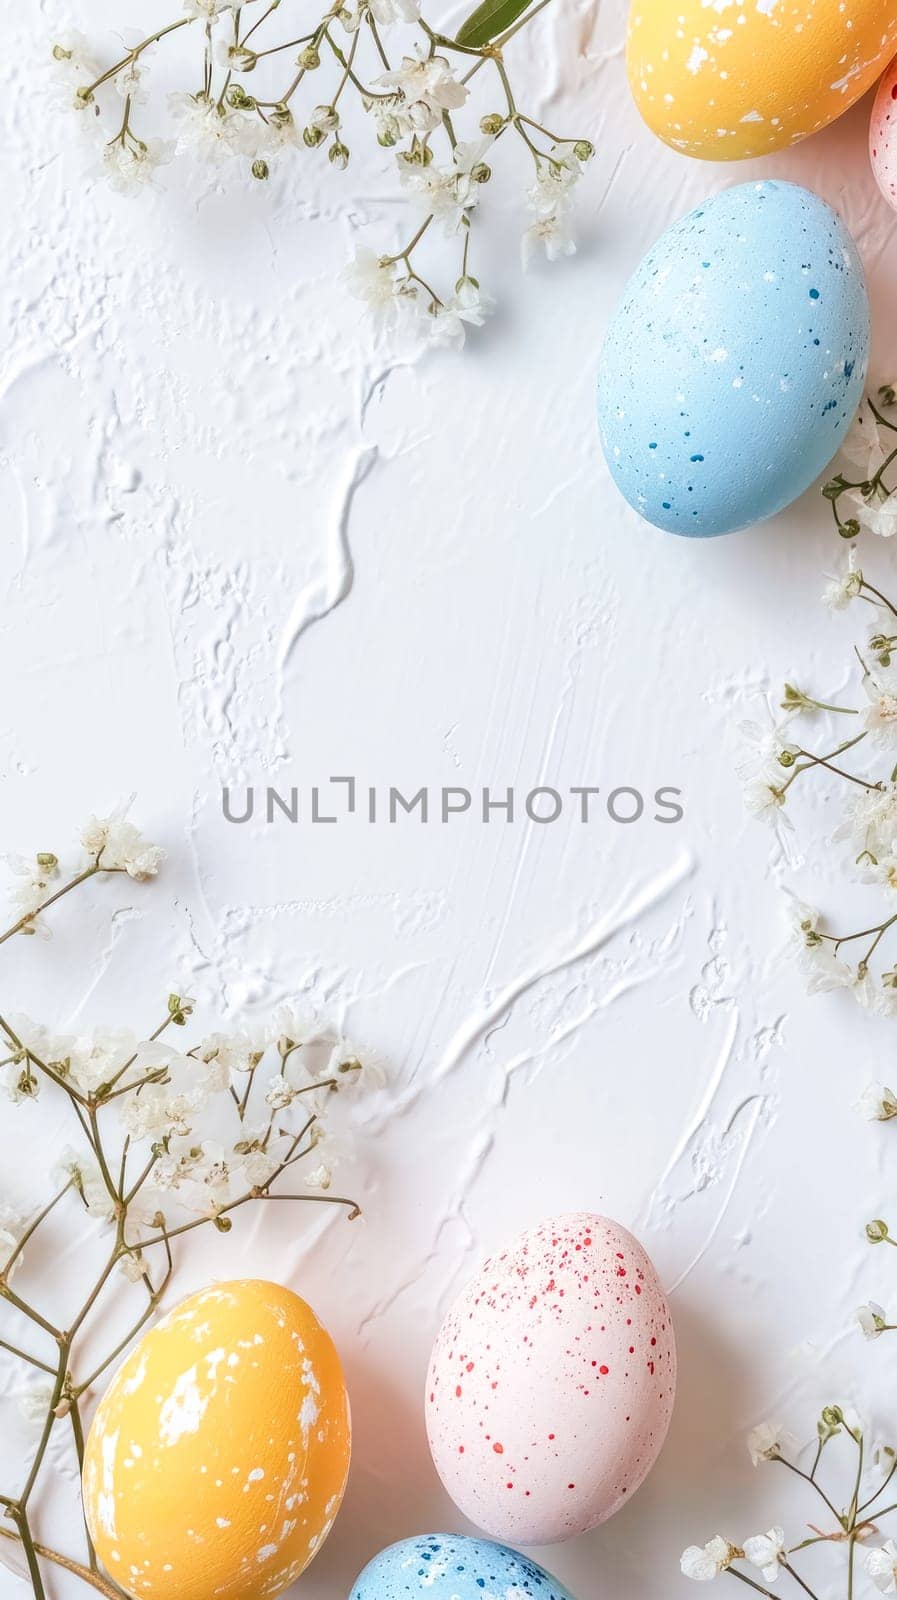 minimalist Easter composition with speckled eggs in pastel colors and delicate white flowers on a textured white background, offering ample copy space. by Edophoto